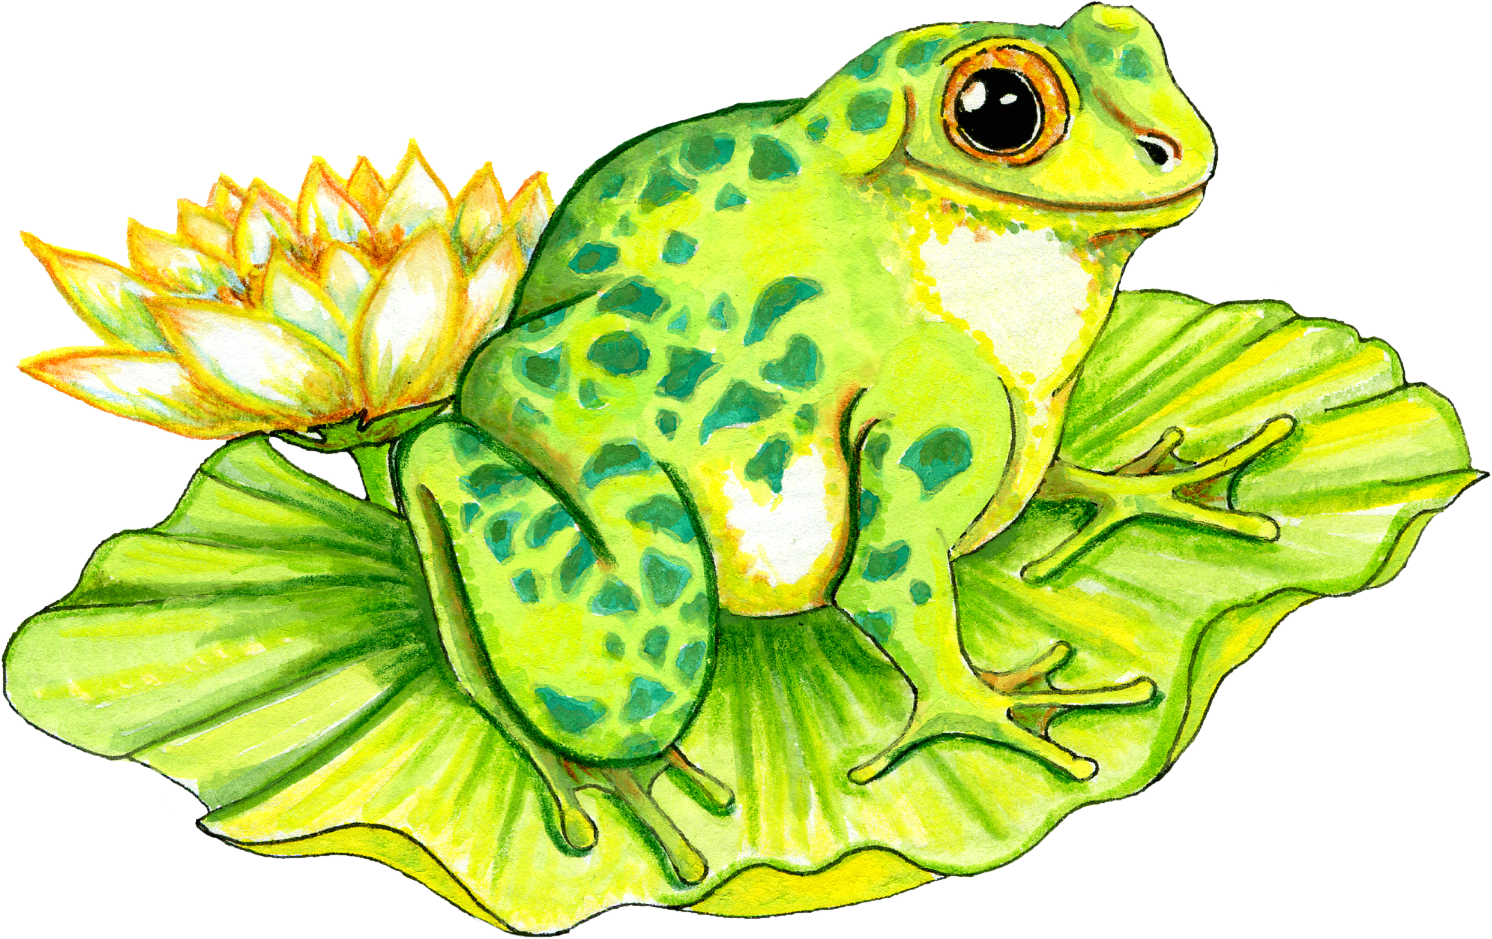 Frog lily pad clipart - Frog 